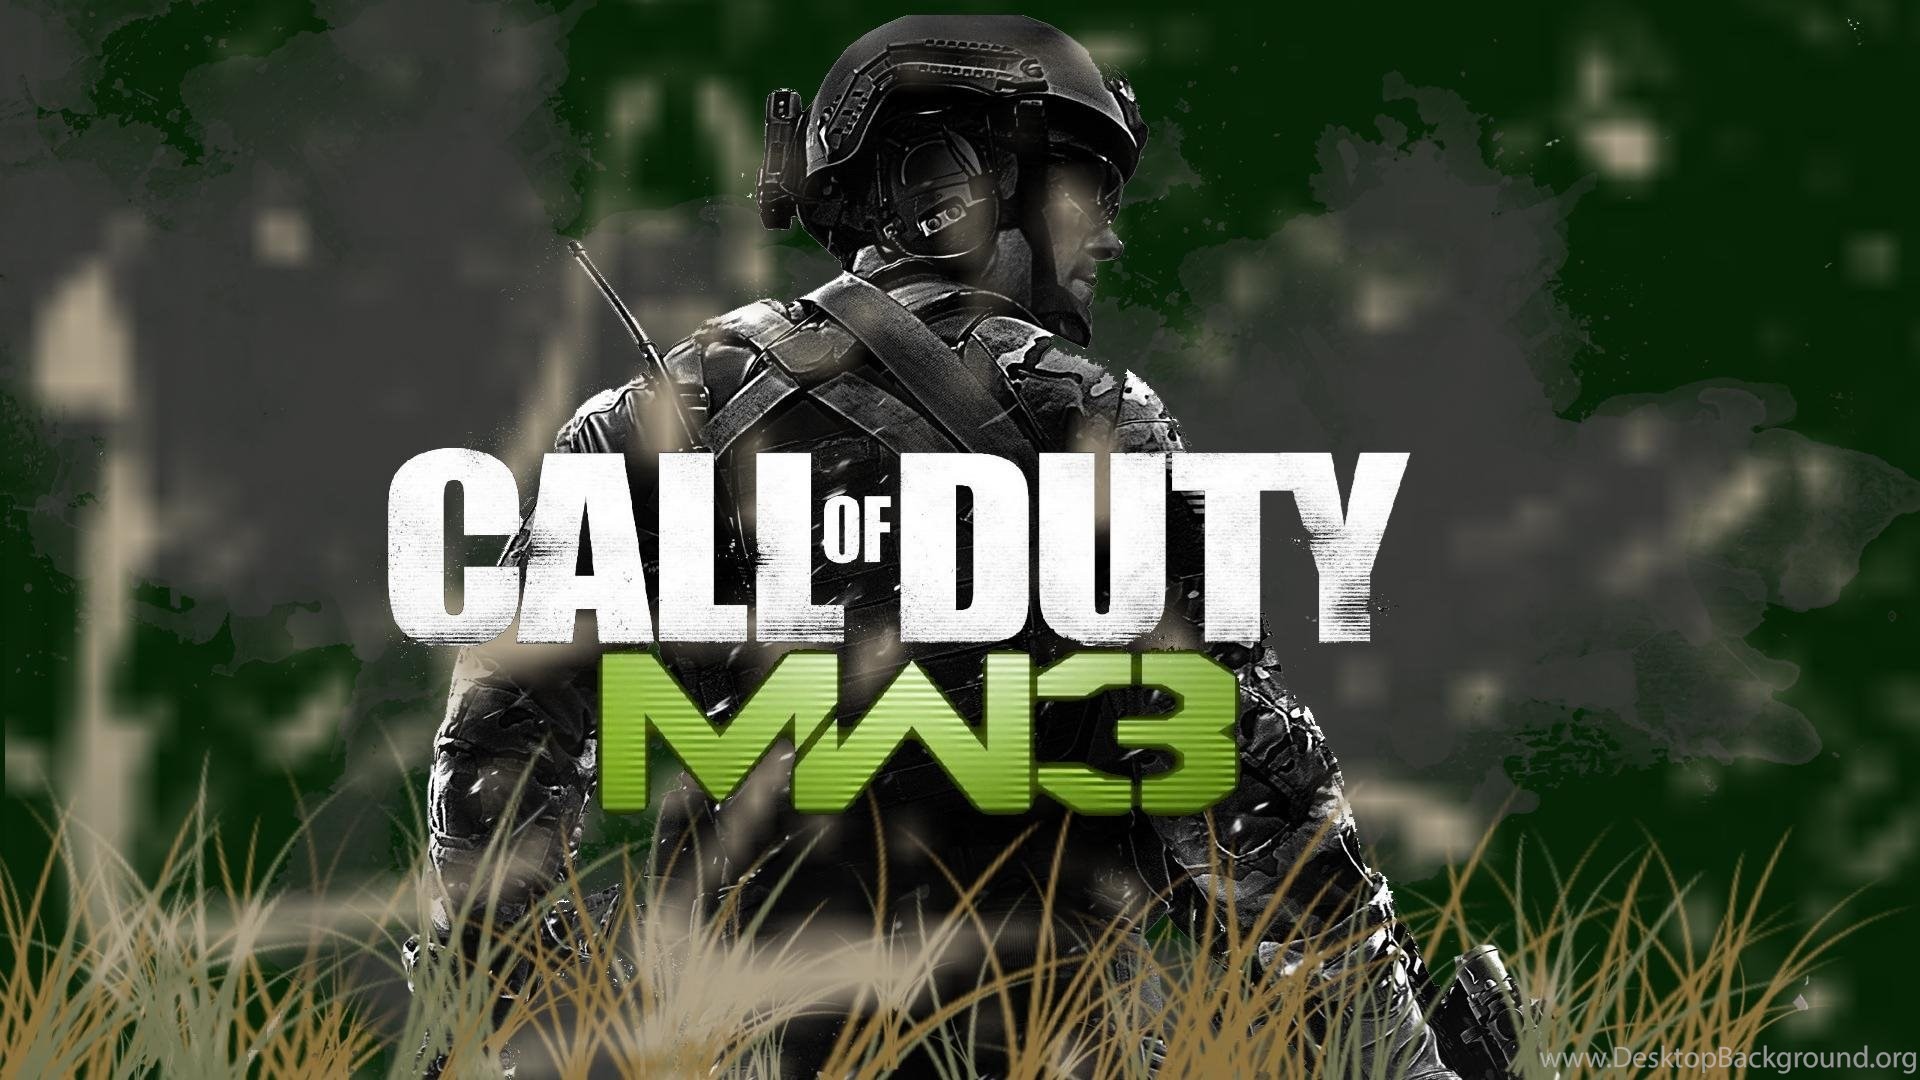 mw3 wallpaper,action adventure game,soldier,games,shooter game,airsoft